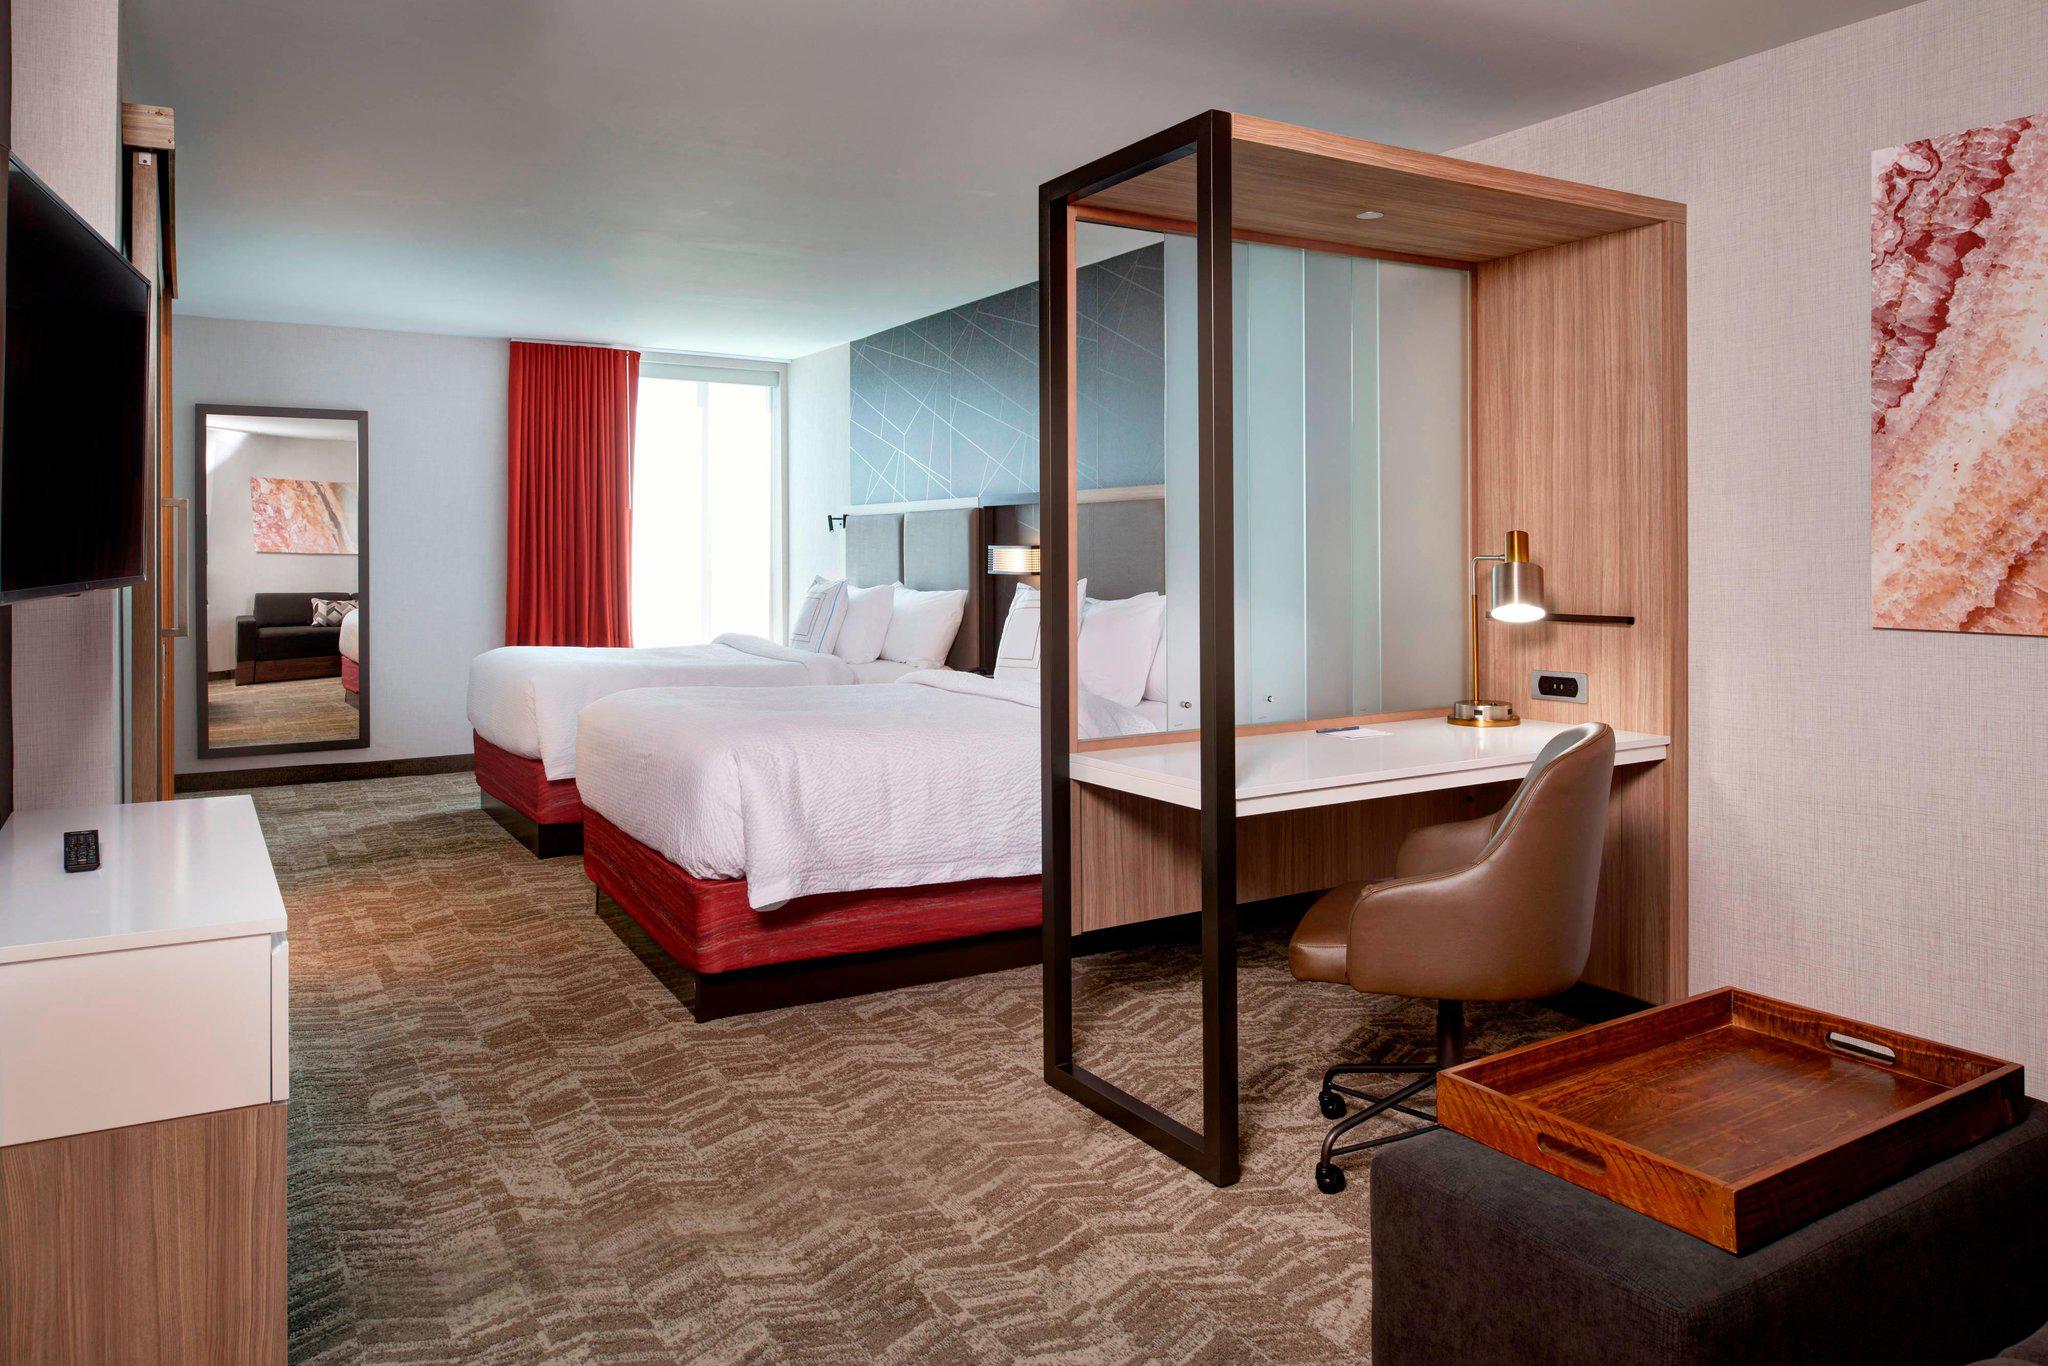 SpringHill Suites by Marriott Grand Rapids West Photo